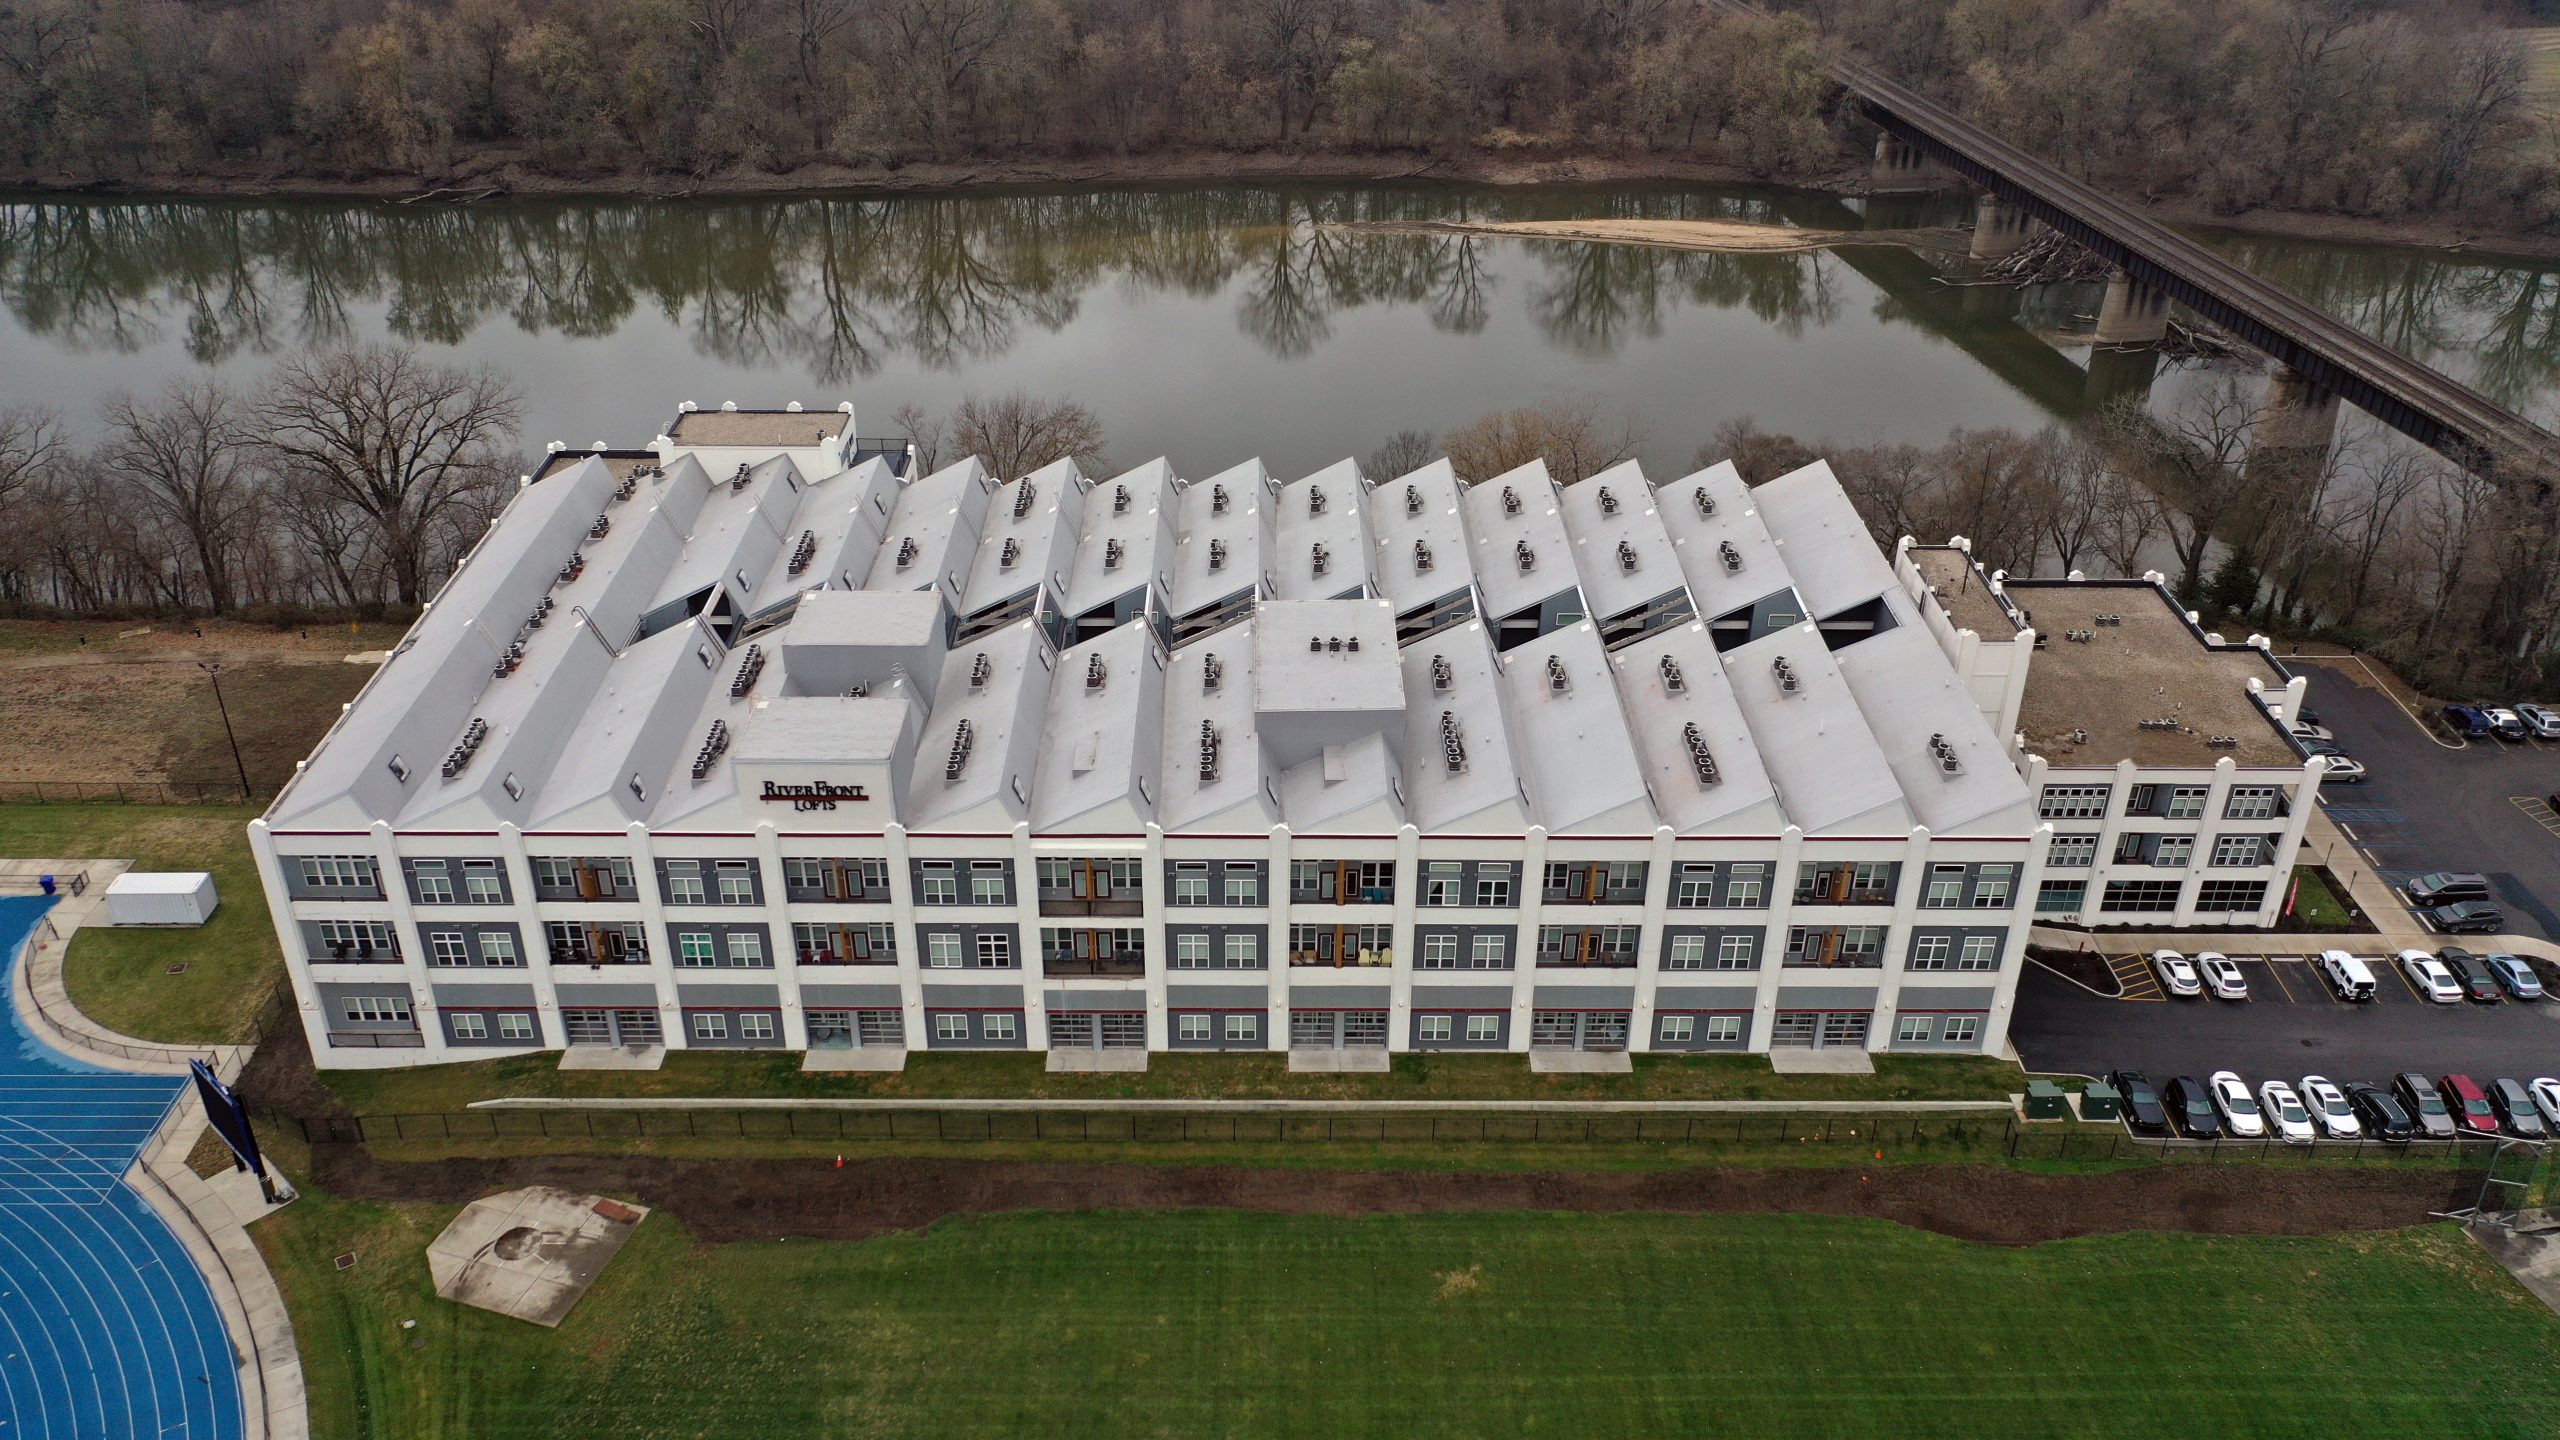 riverftont lofts commercial roofing project by ce reeve roofing in Indiana